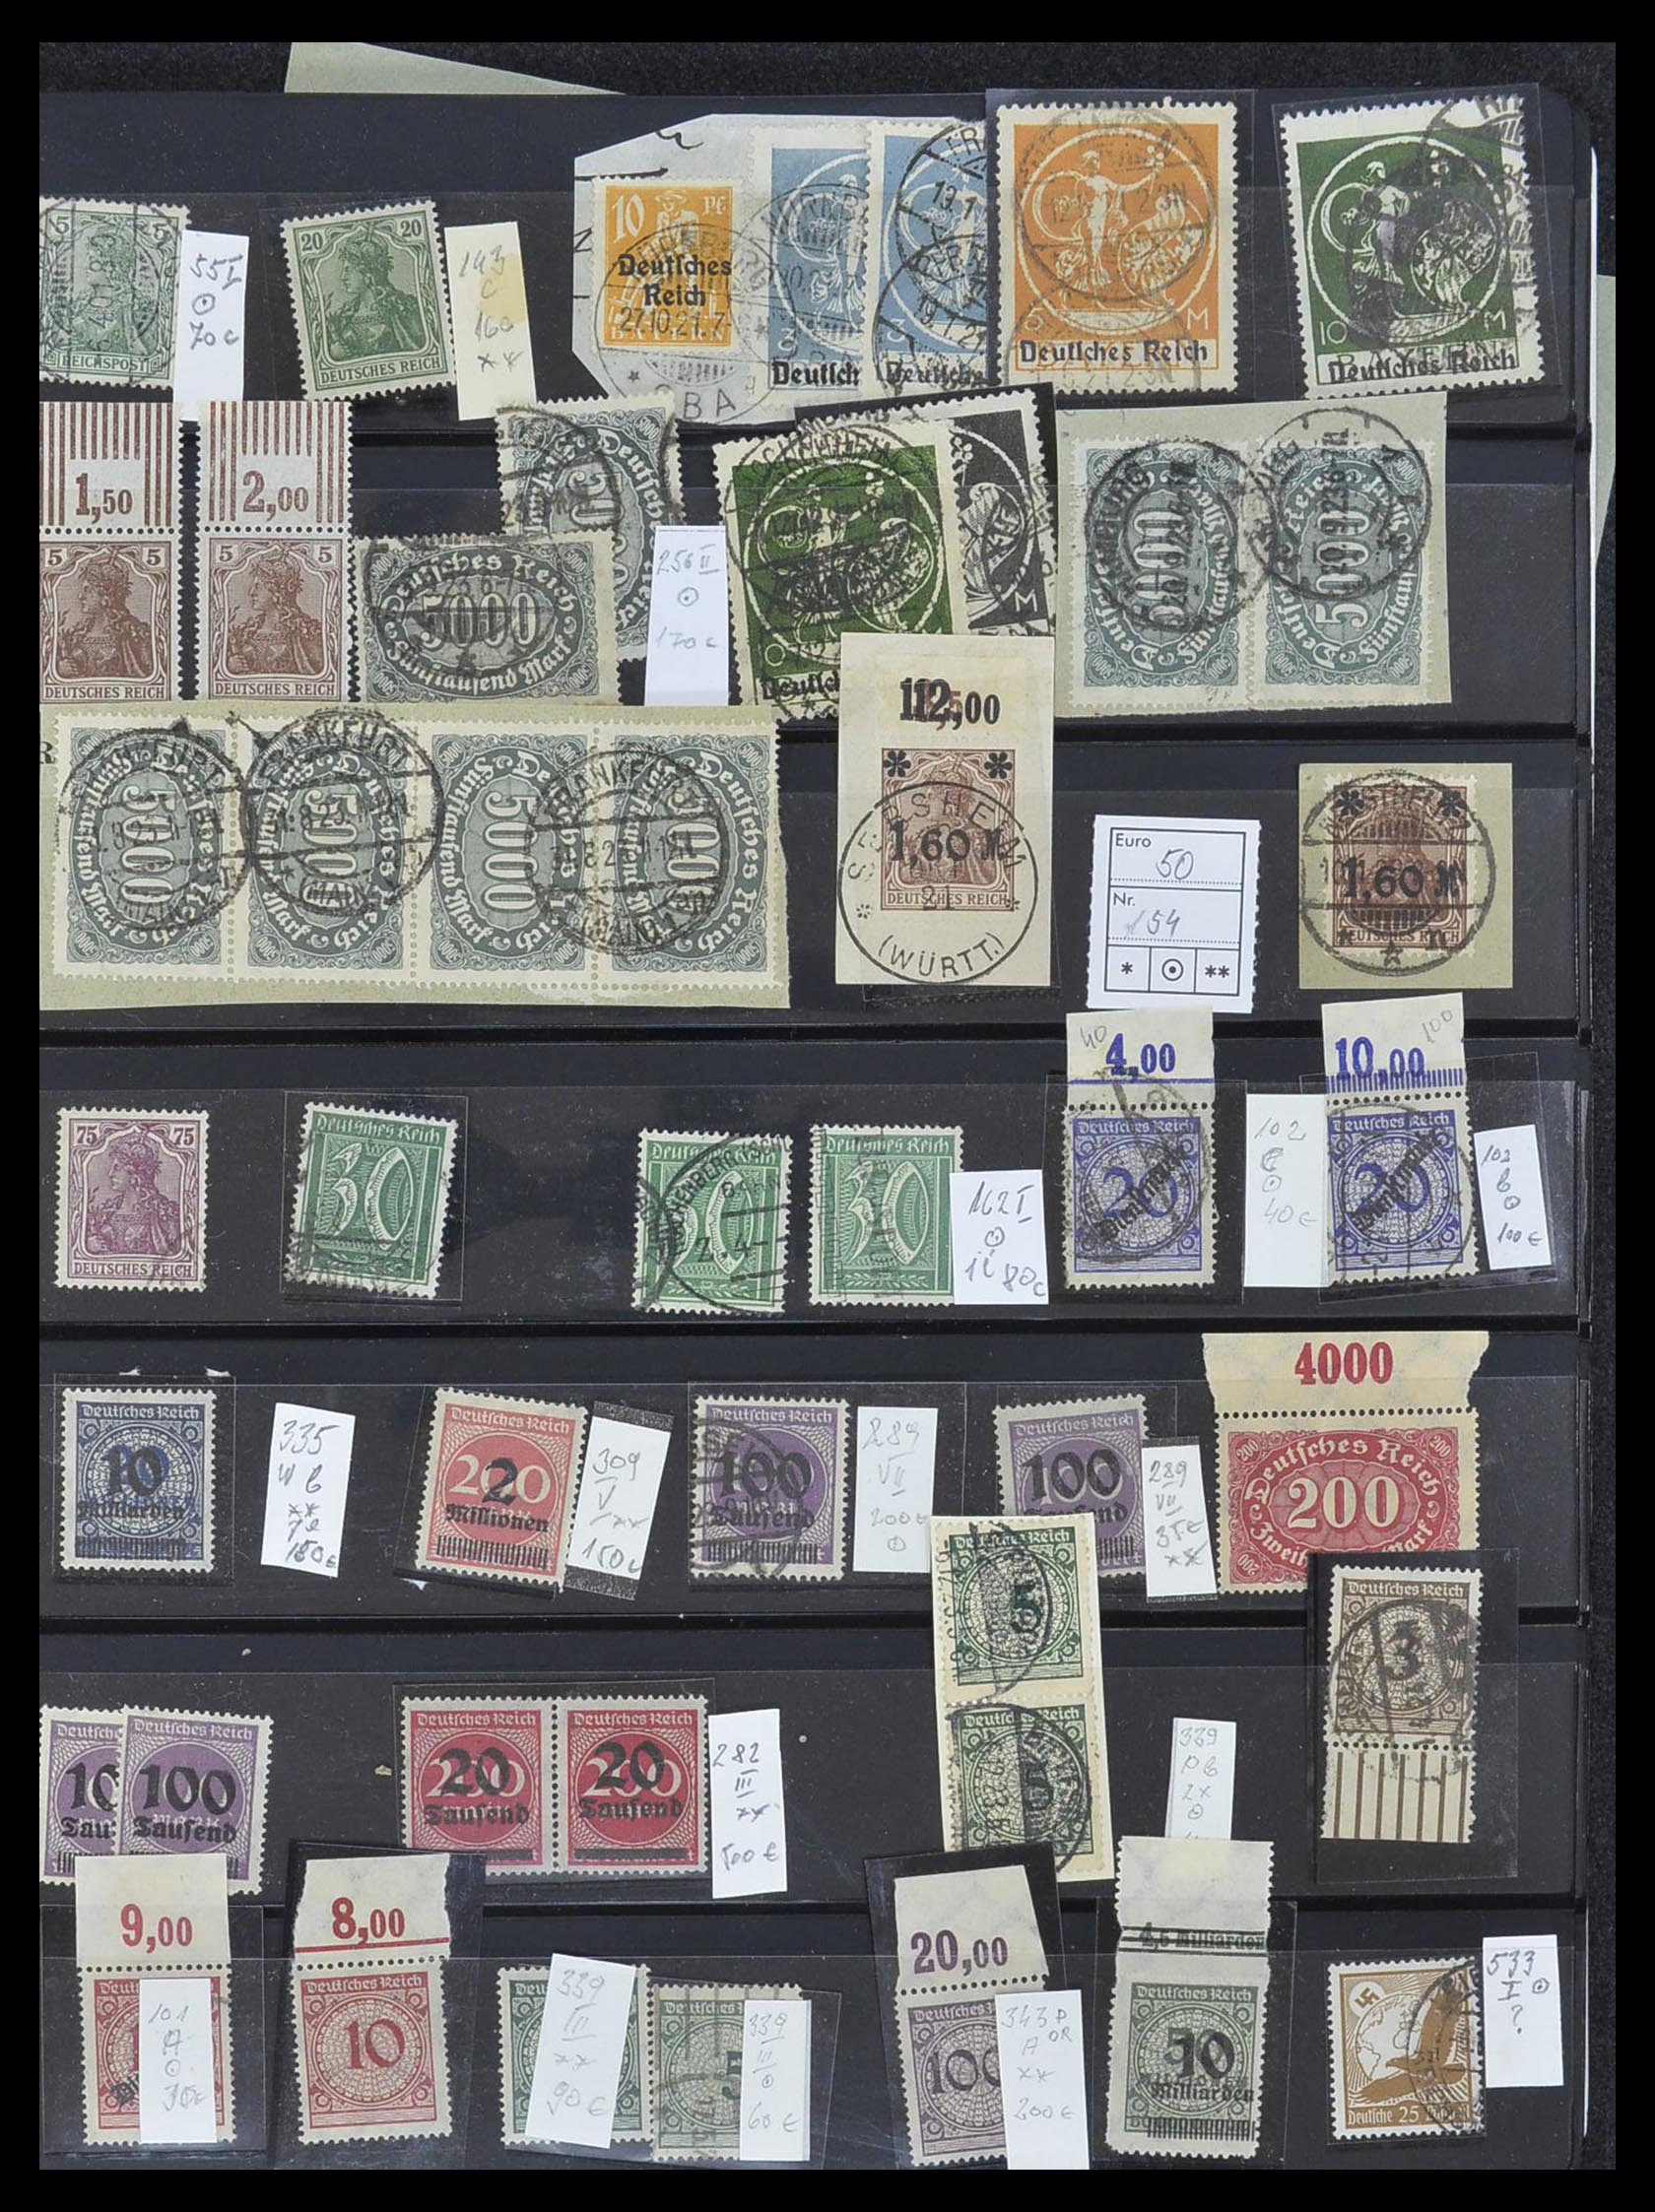 33957 031 - Stamp collection 33957 German Reich infla 1923.